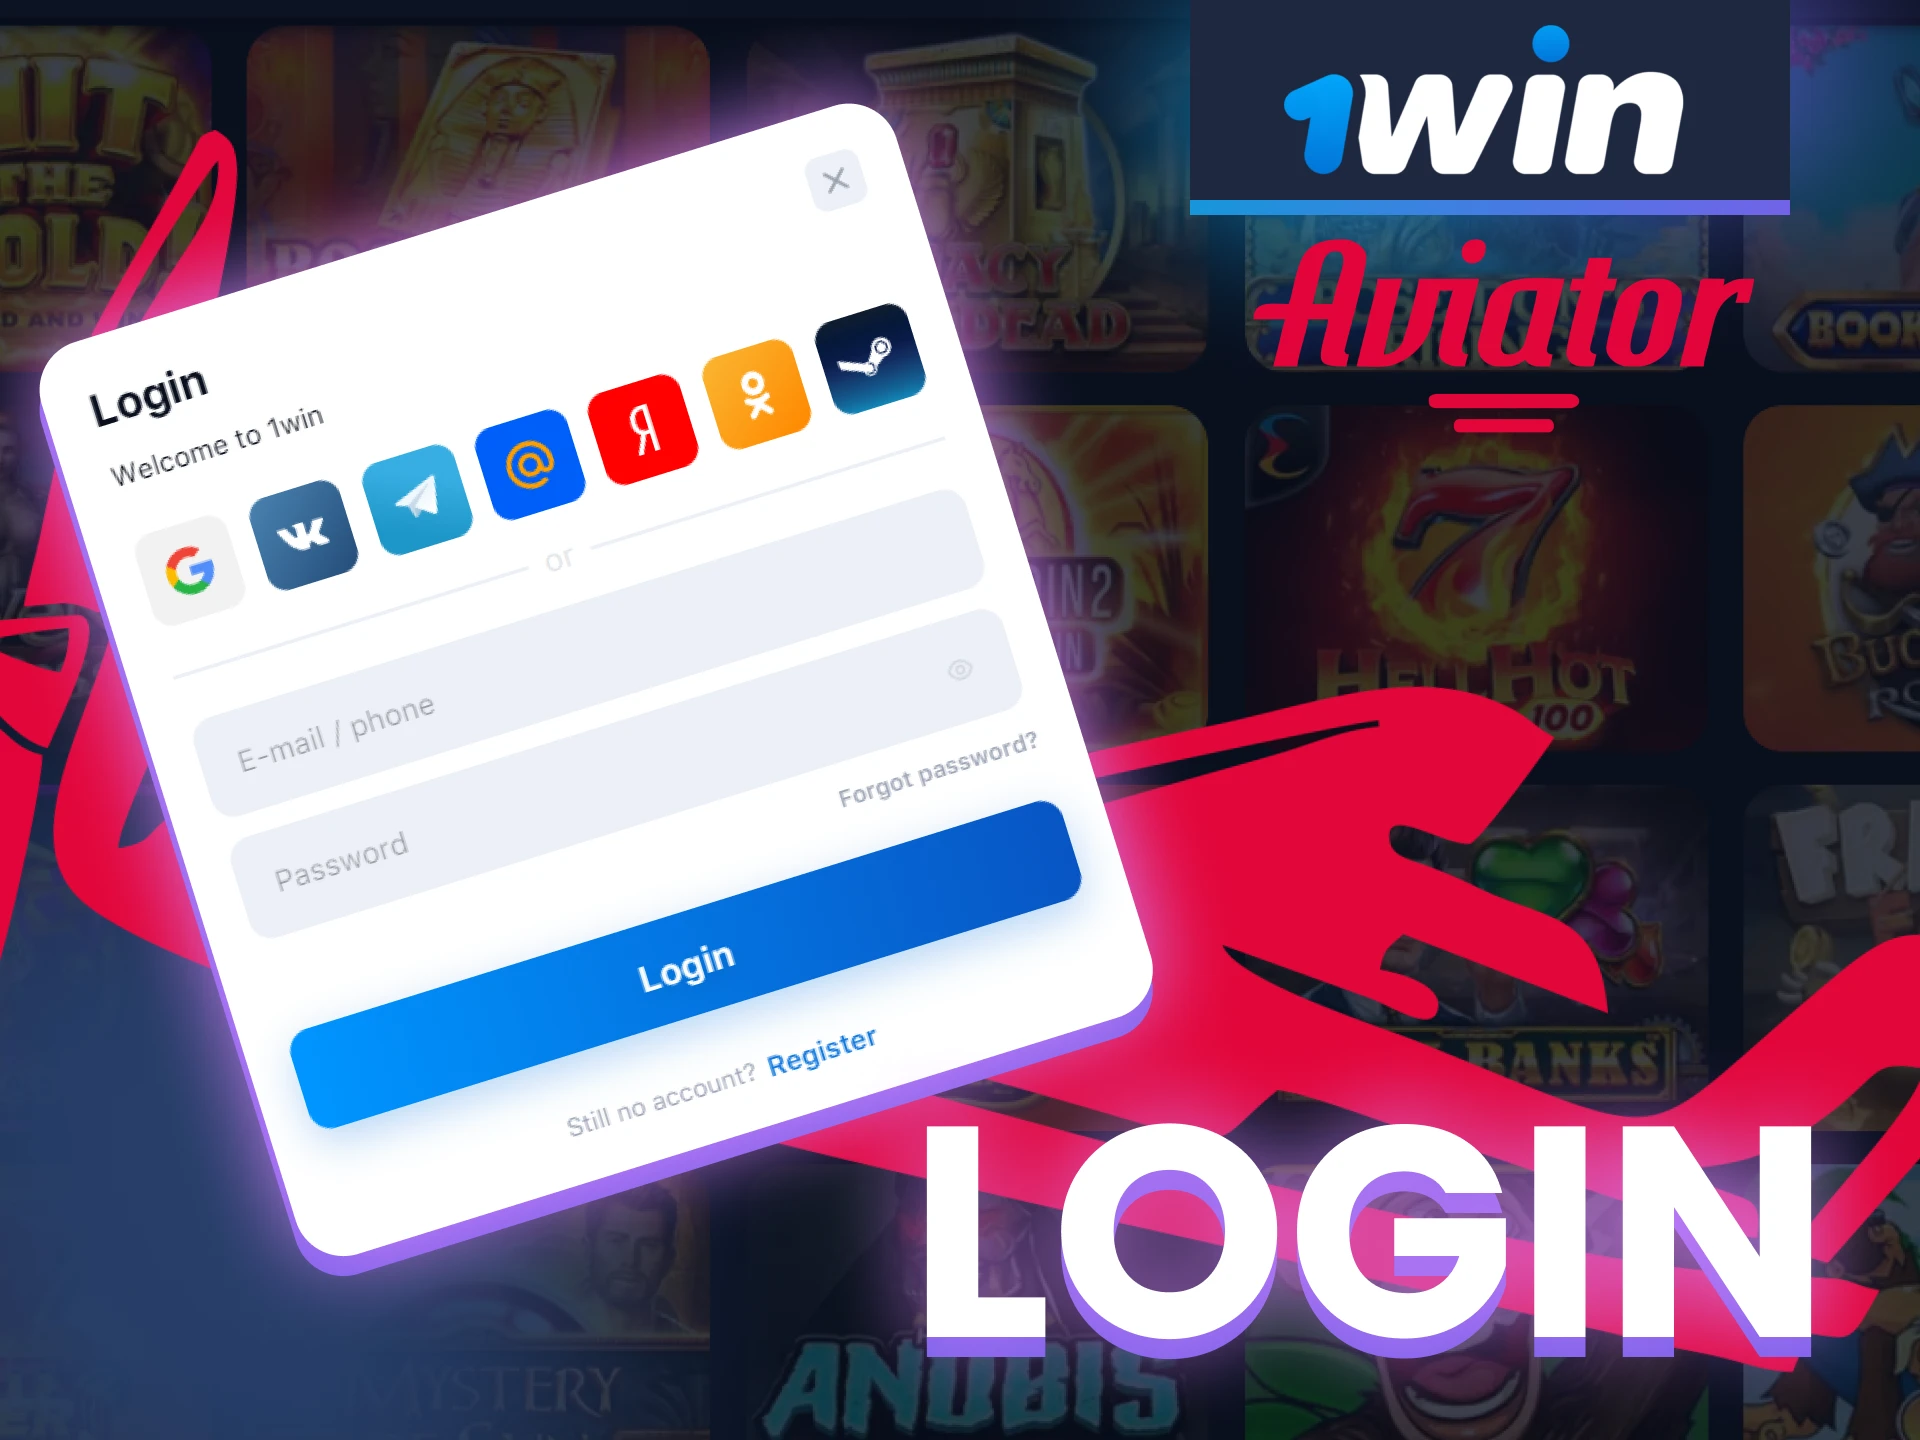 Log in to your personal 1win account to play Aviator.